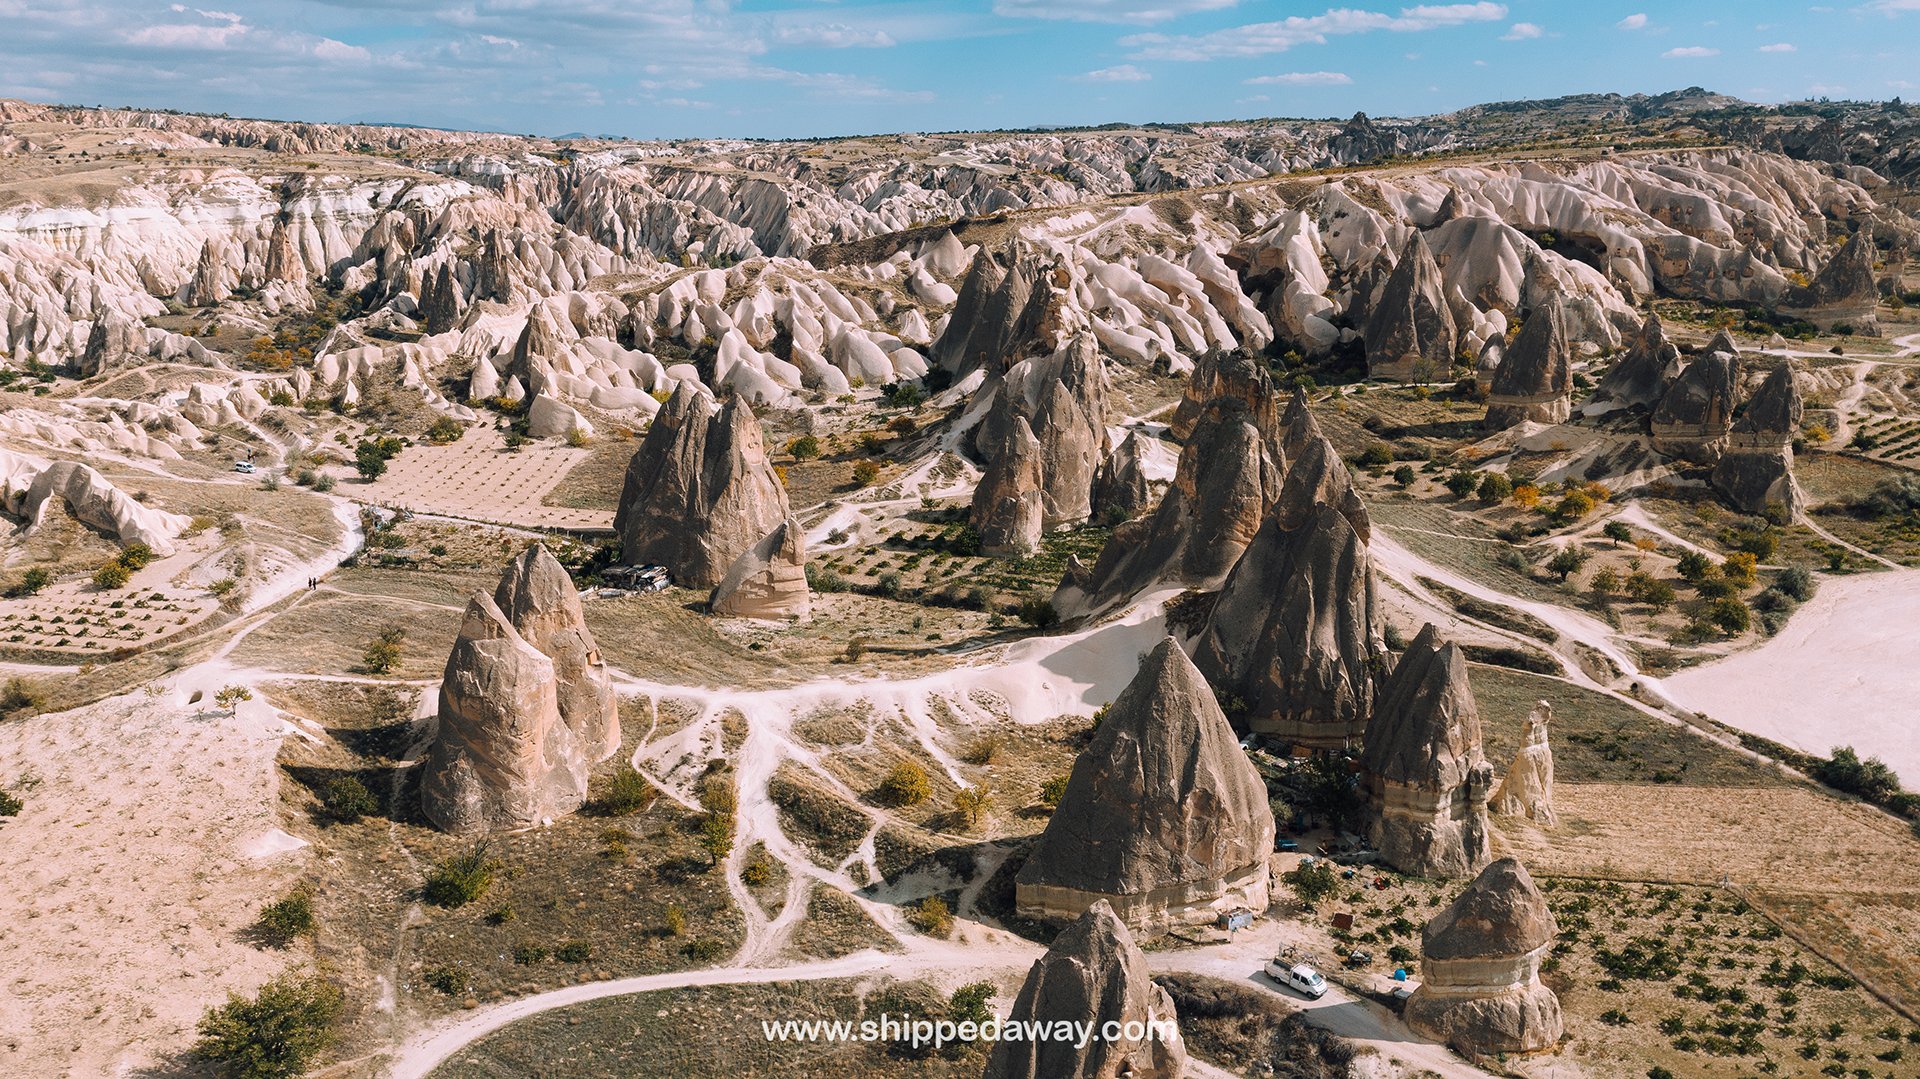 Sword Valley Cappadocia - best sunrise viewpoint in Cappadocia for watching balloons take off